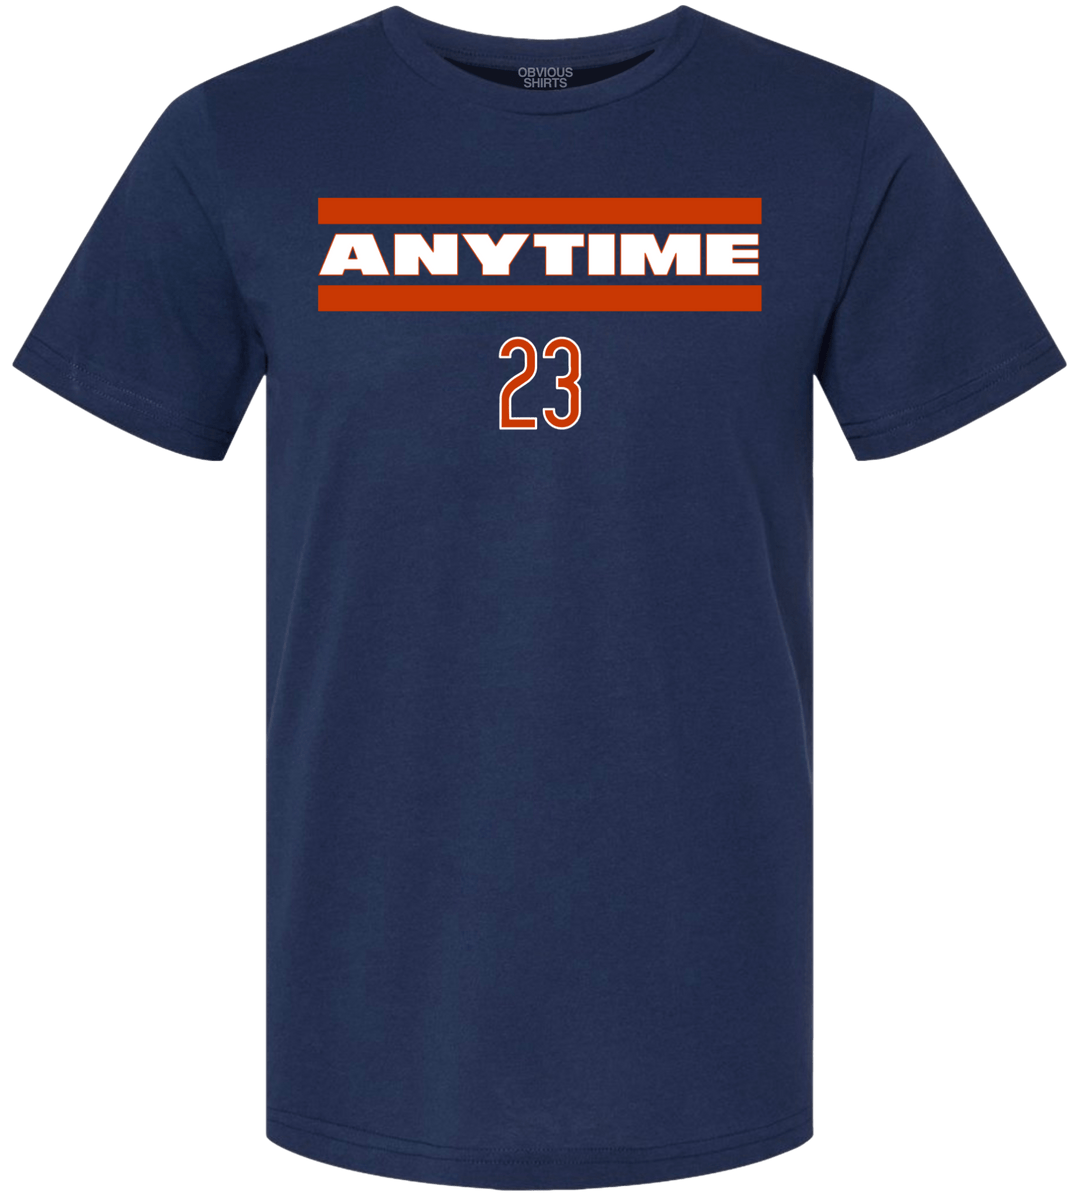 ANYTIME. - OBVIOUS SHIRTS